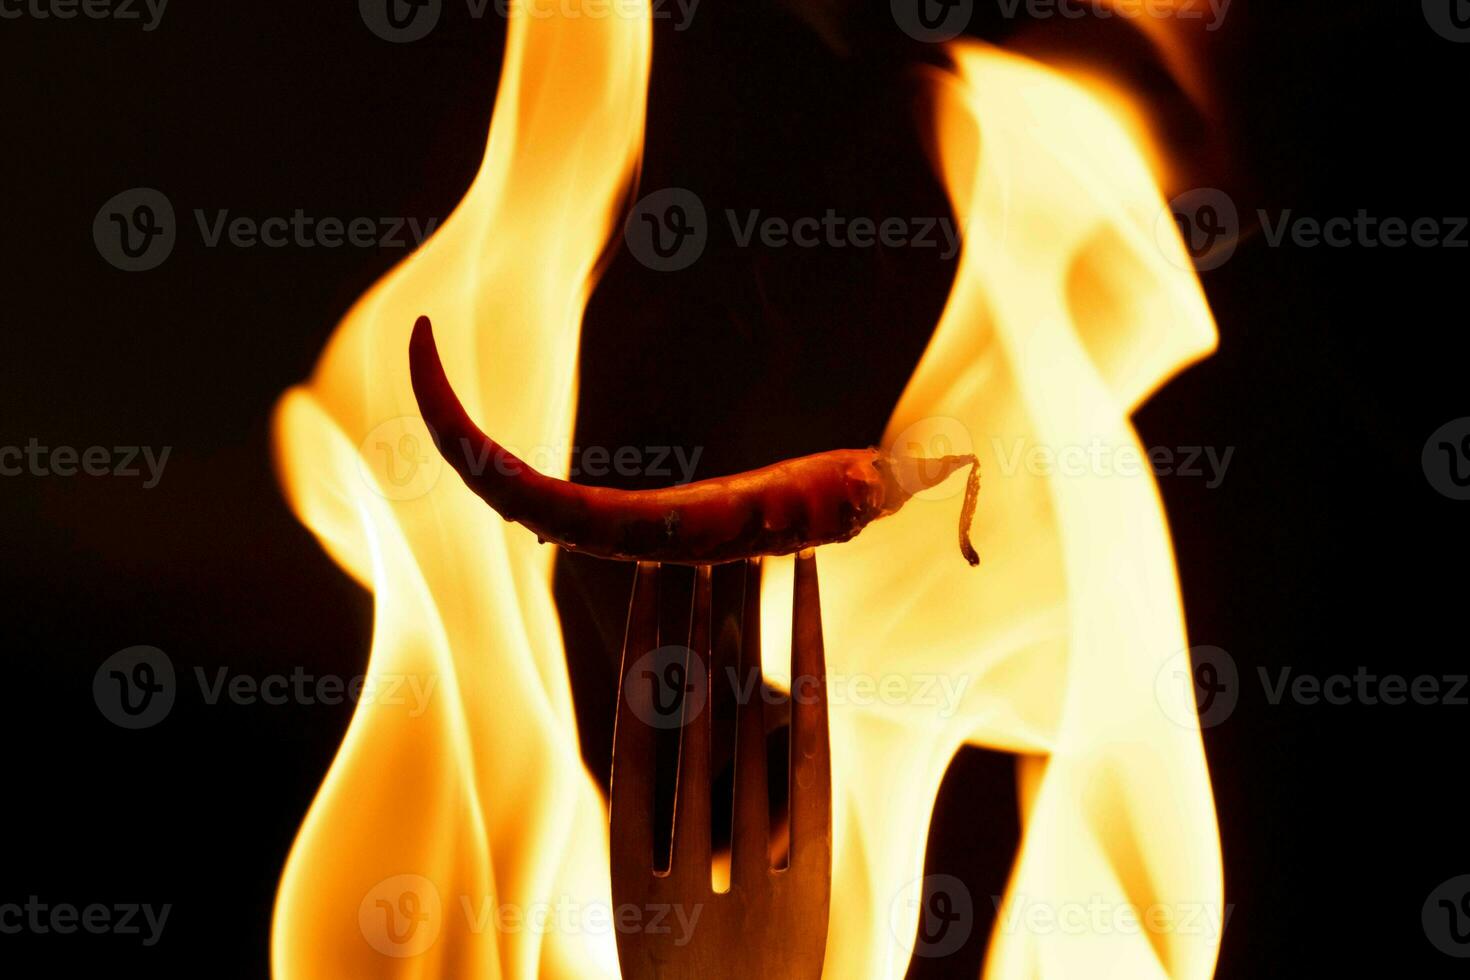 Chili pepper on fork with flames on black background. Burning red chili pepper. Slow motion photo